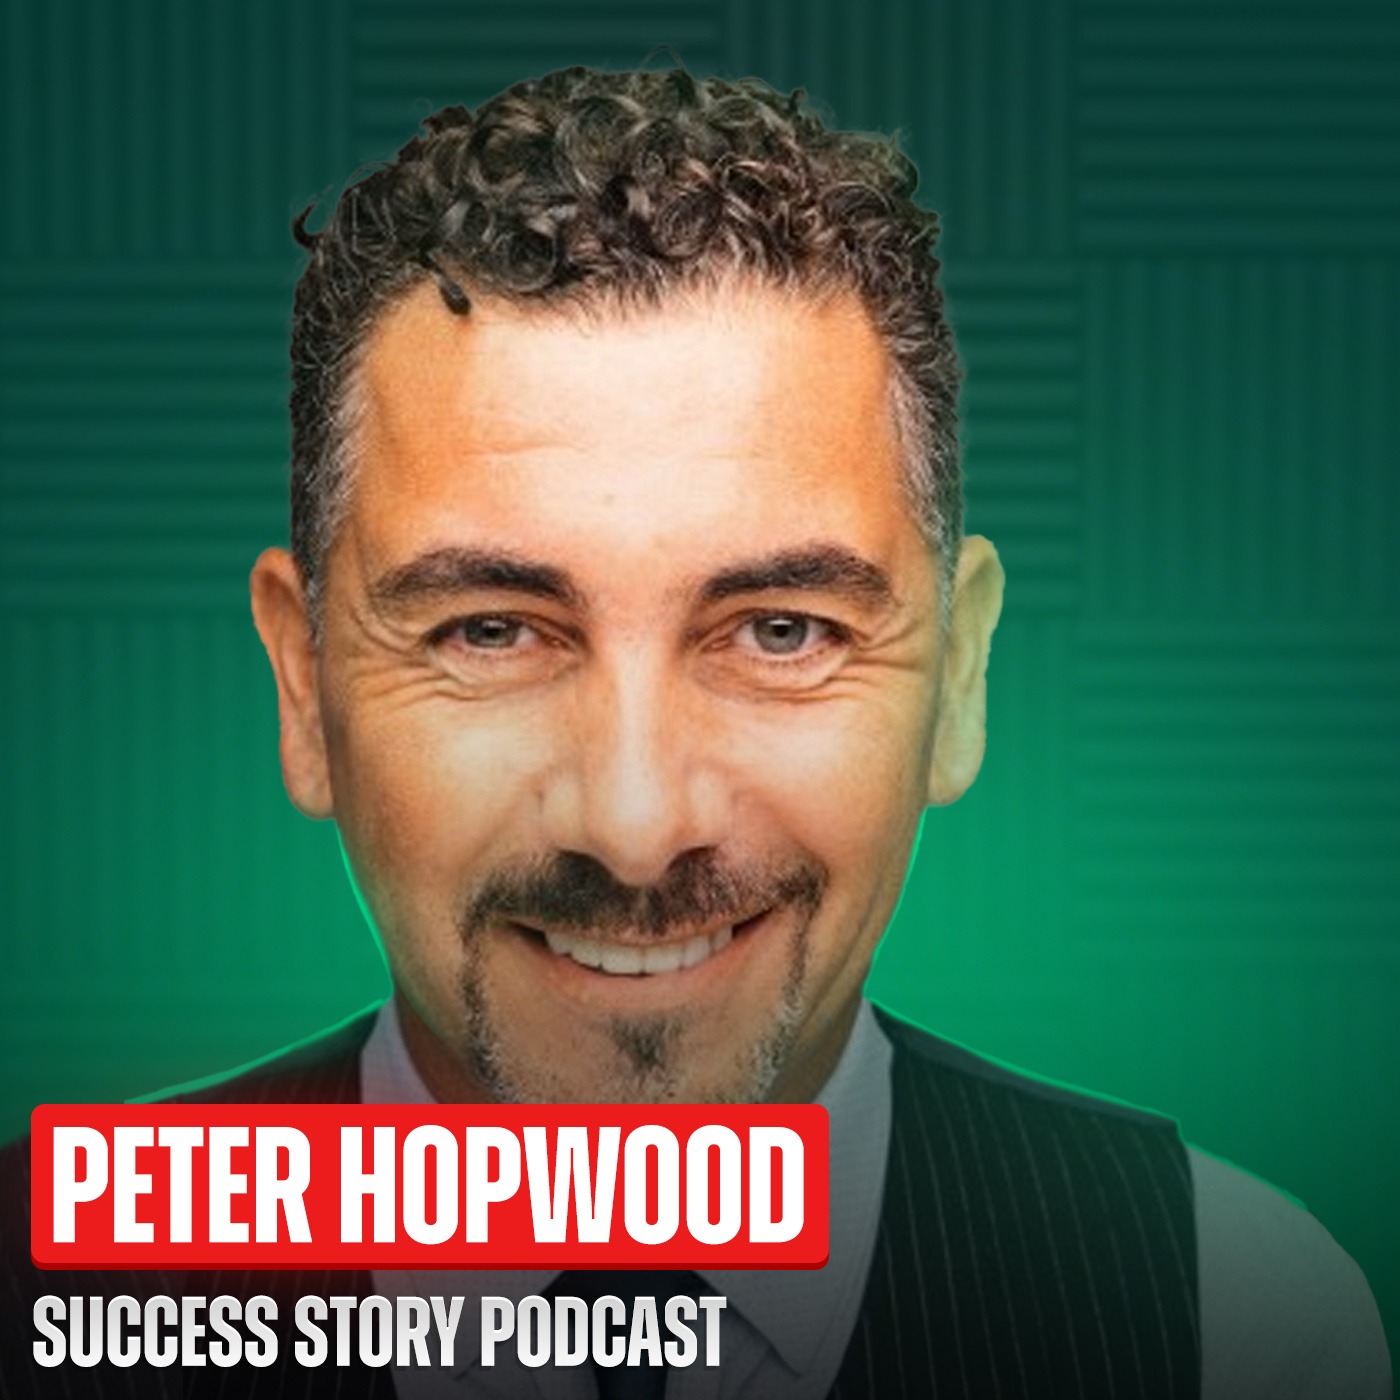 Lessons - Standing Out and Being Different | Peter Hopwood - Speaking Trainer, TEDx Coach